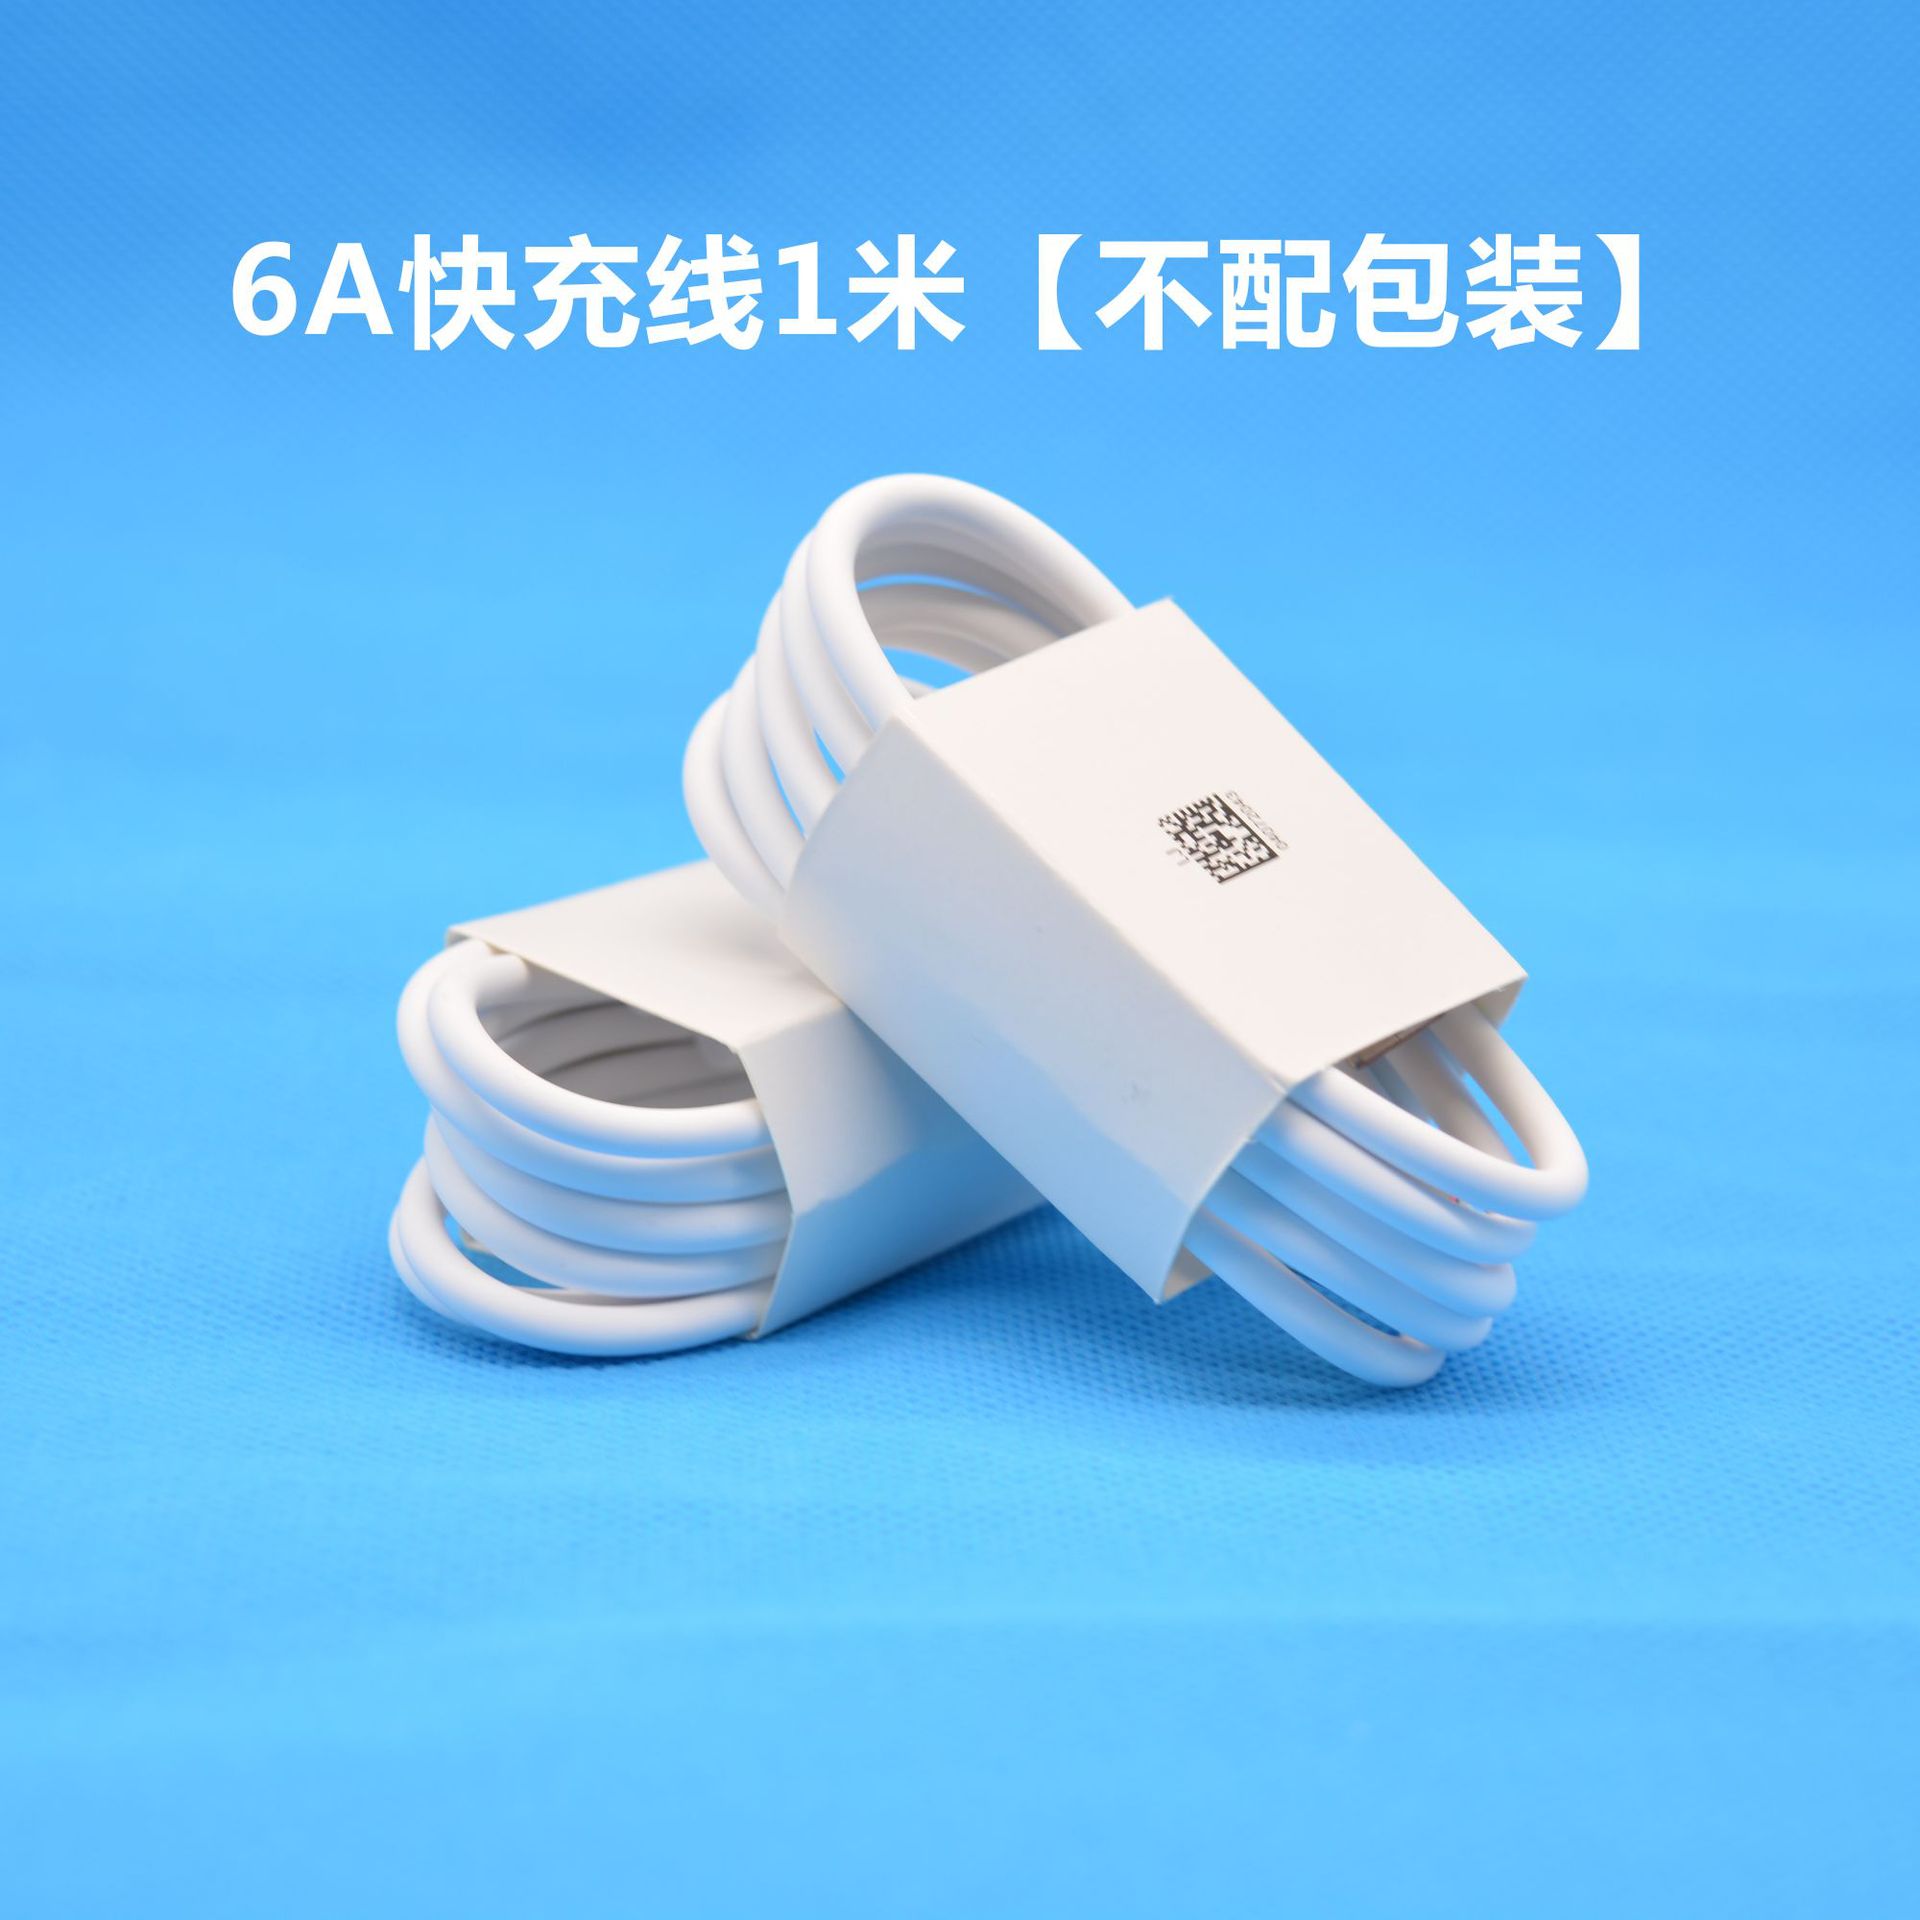 USB Charging Head Suitable for 66W Charger Original 3C Certified Mobile Phone Super Flash Charging Fast Charging Head Set Wholesale